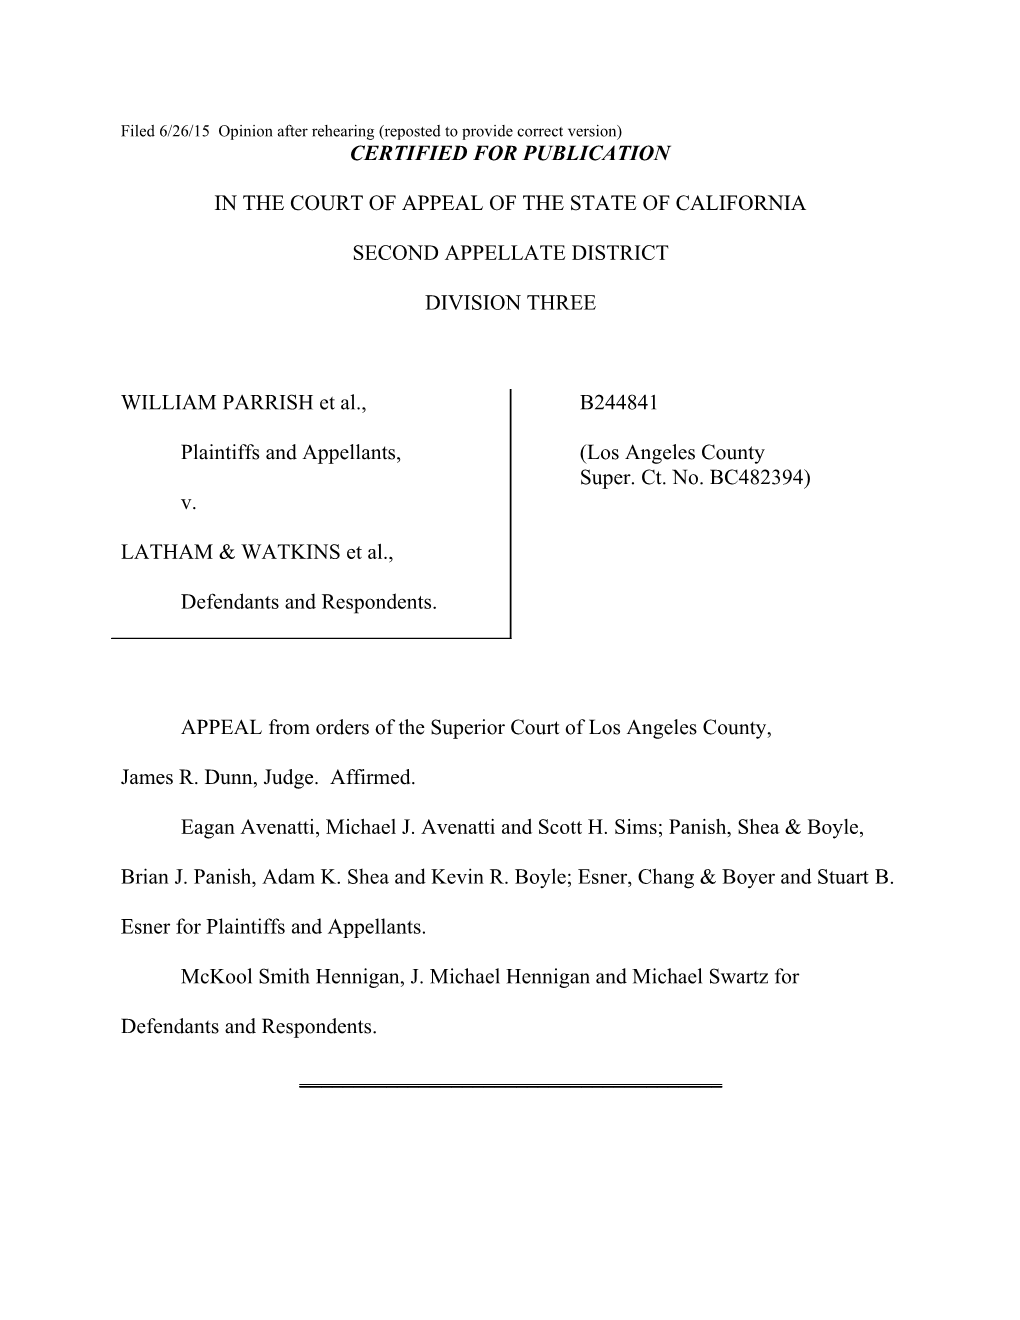 Filed 6/26/15 Opinion After Rehearing (Reposted to Provide Correct Version)